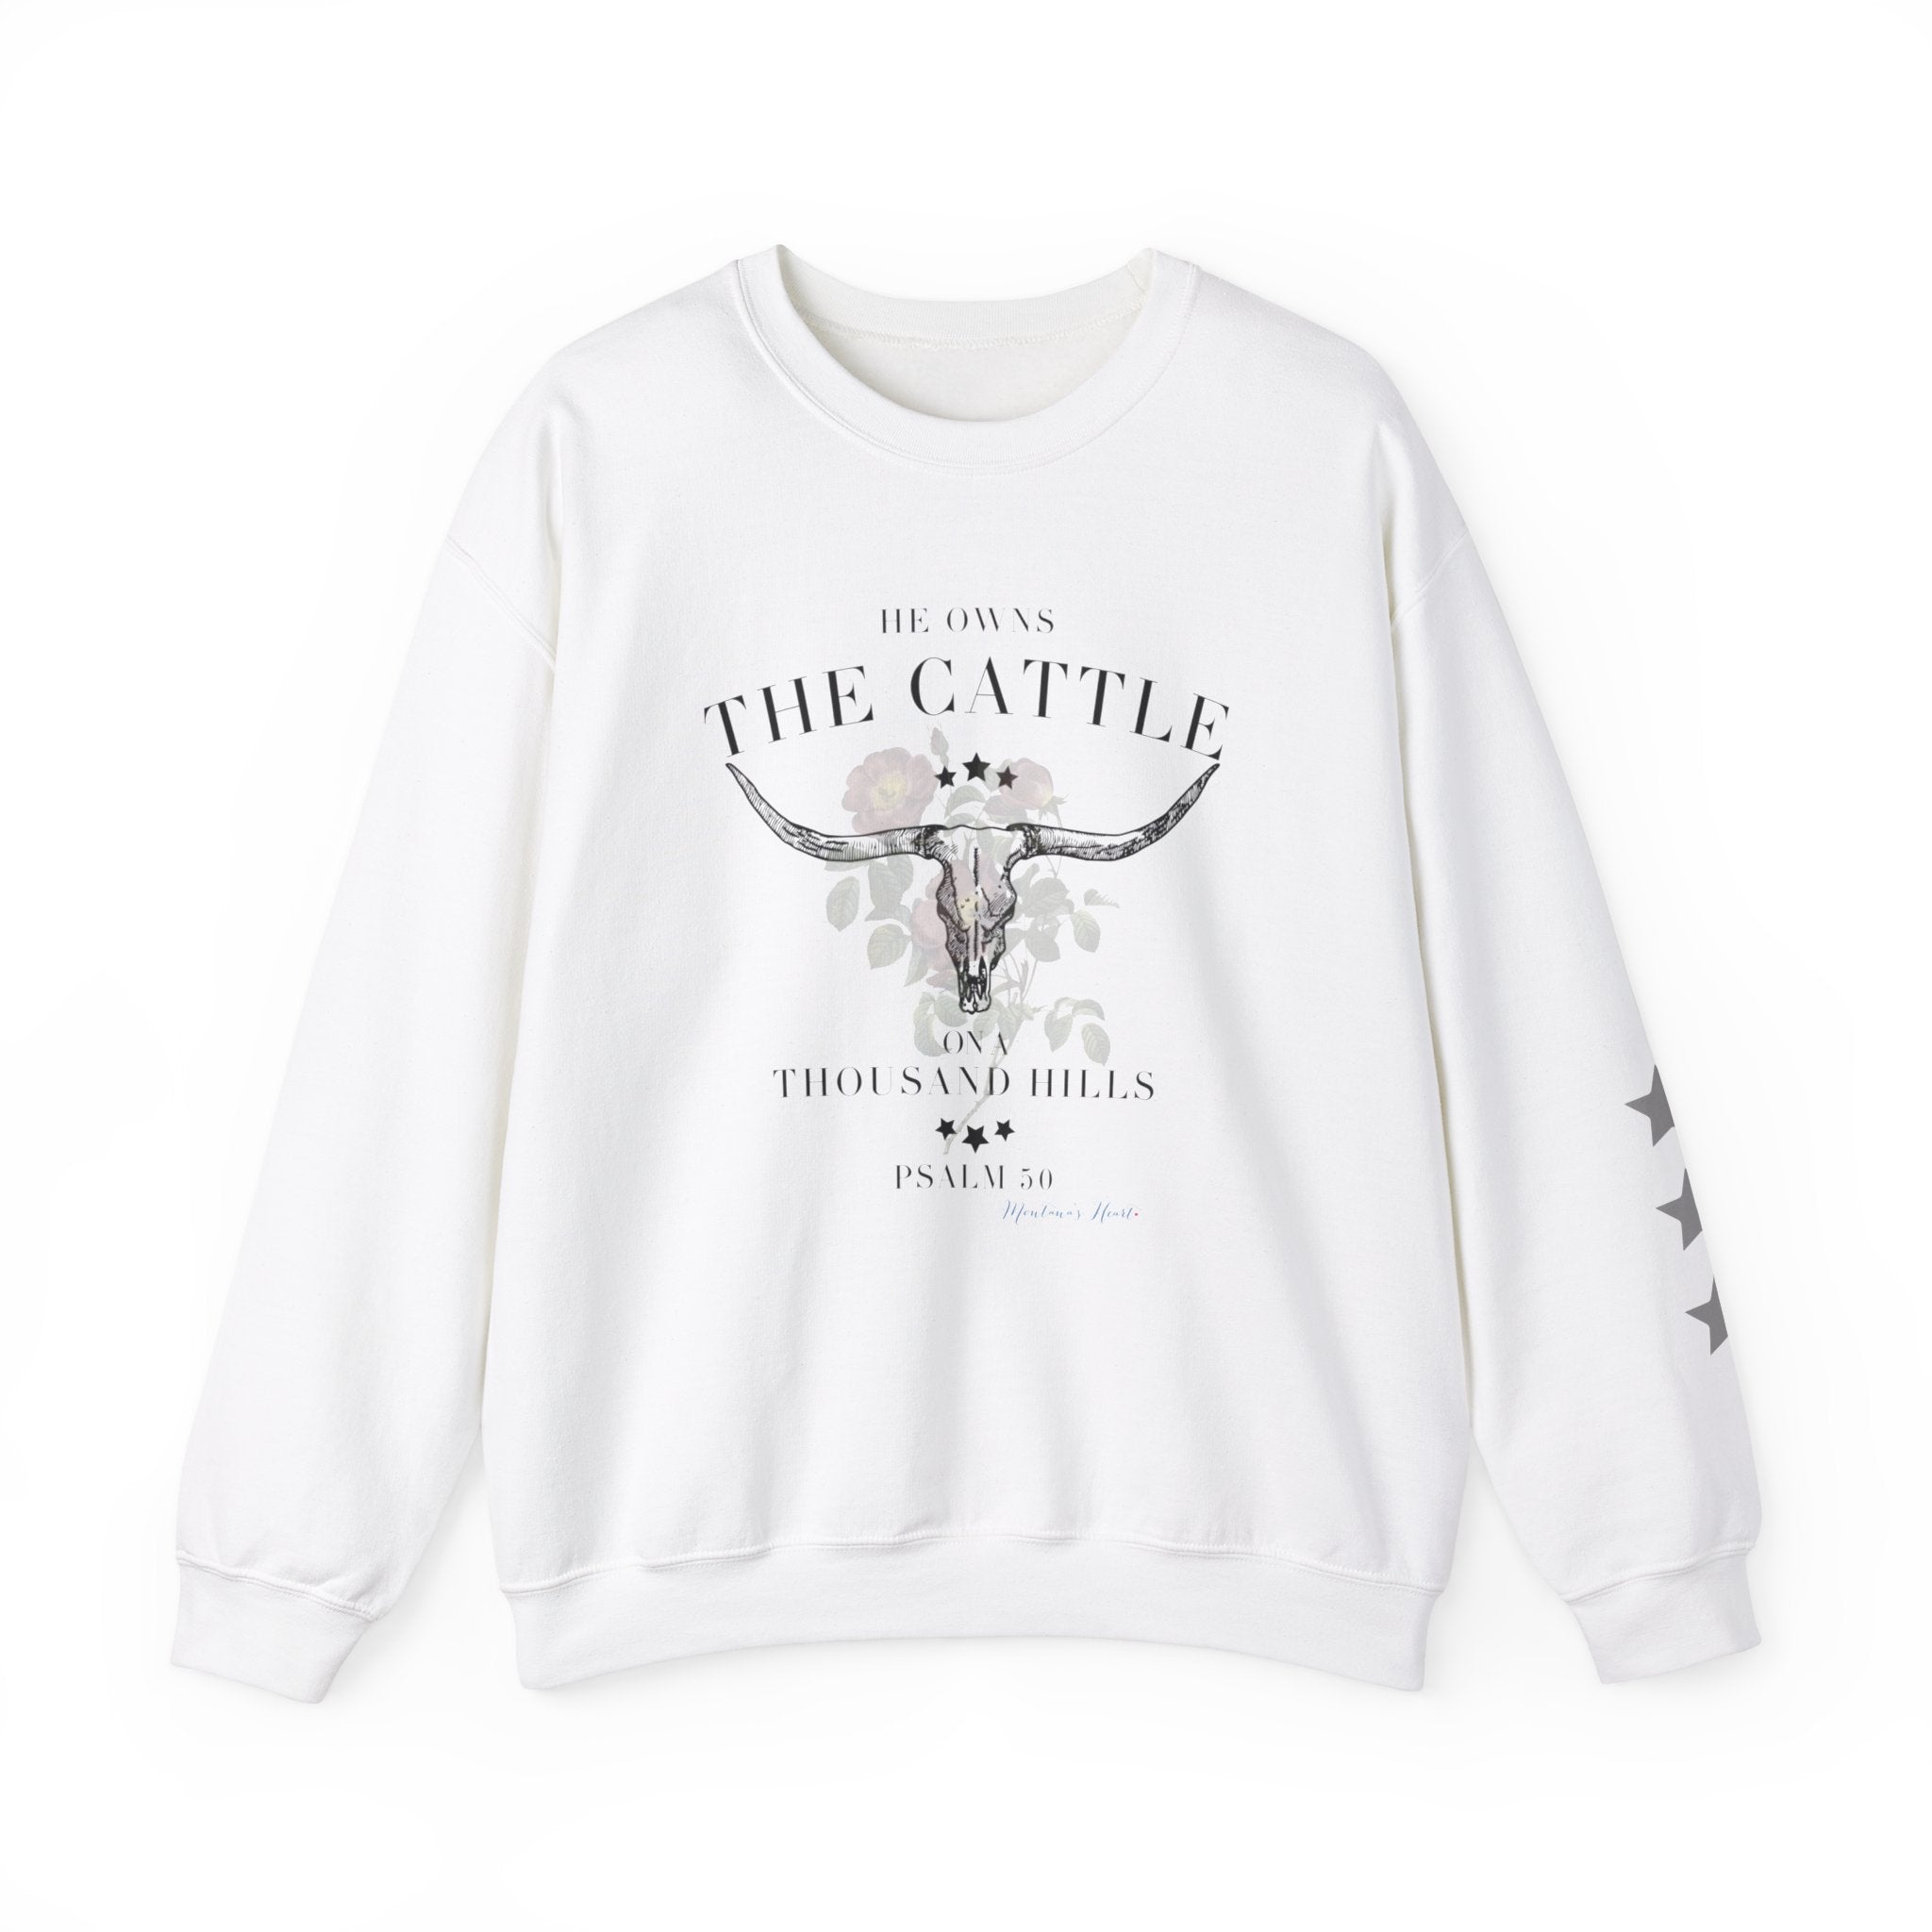 He owns the cattle on a thousand hills, Ladies sweatshirt